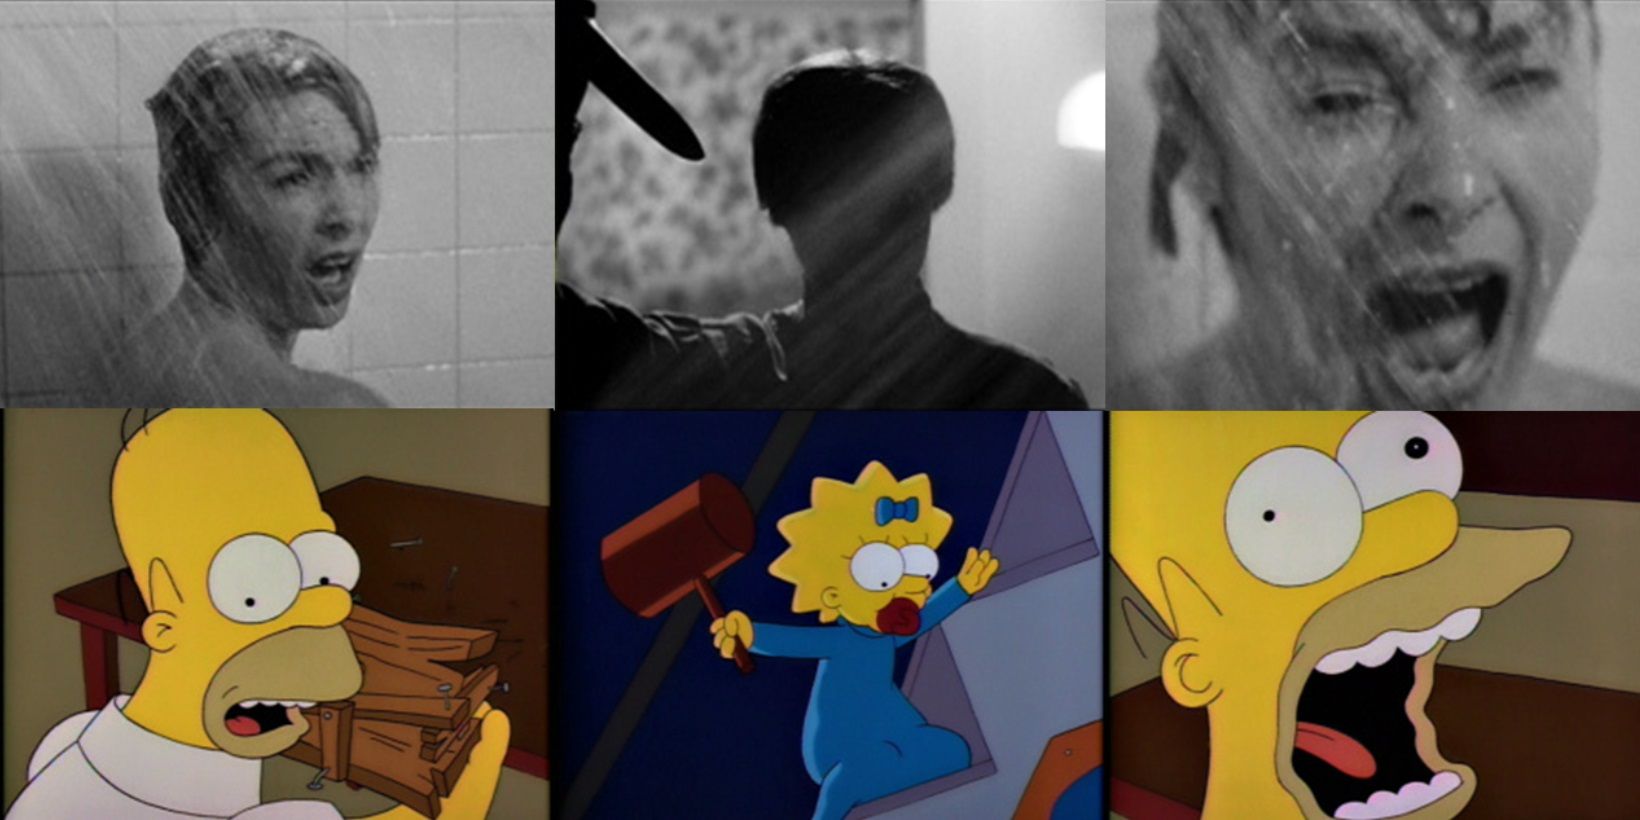 Side by side comparison of the shower murder parody in The Simpsons and Psycho